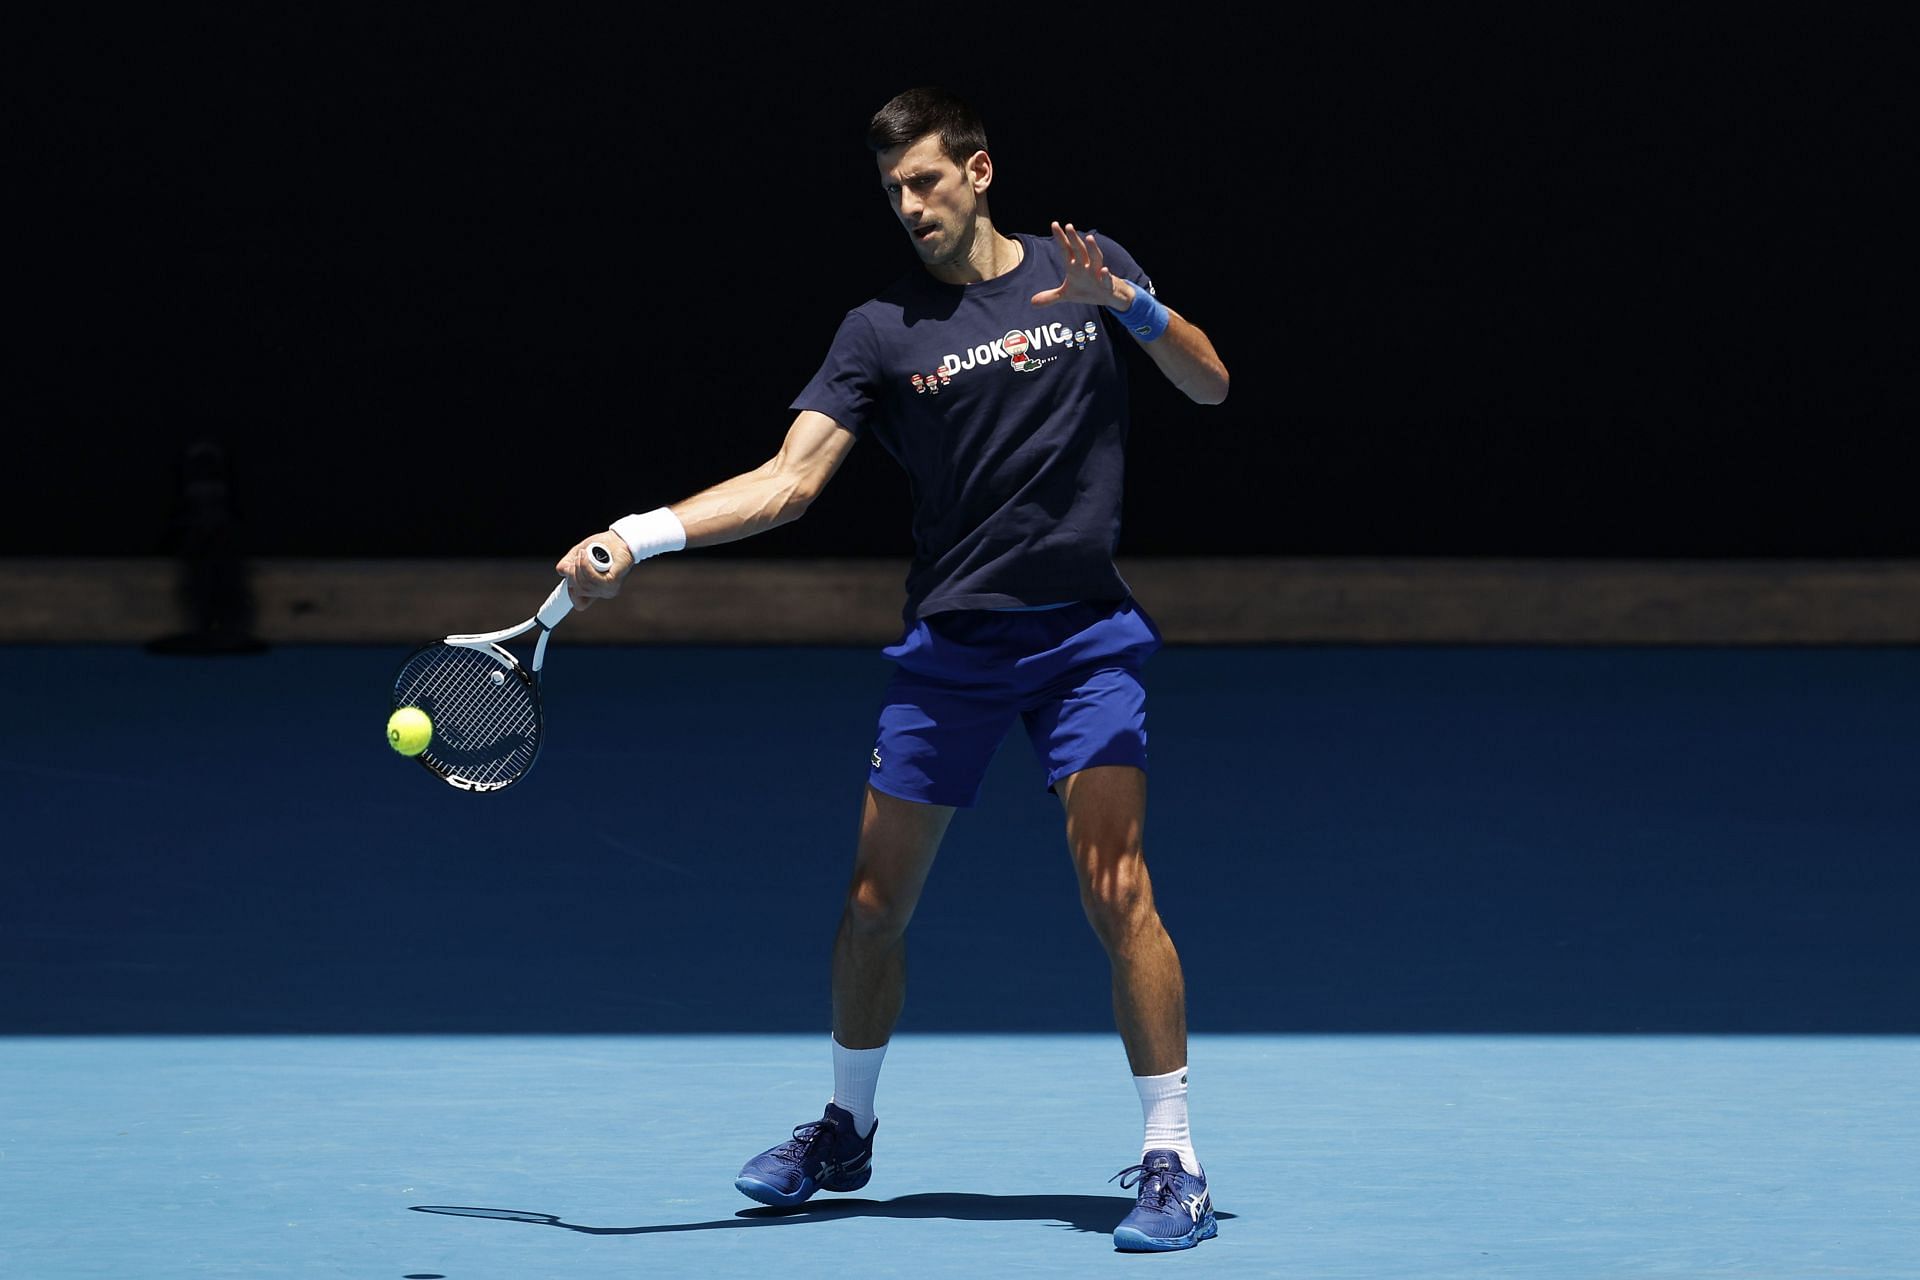 If Novak Djokovic withdraws after the tourunament starts, his opponent will get a walkover